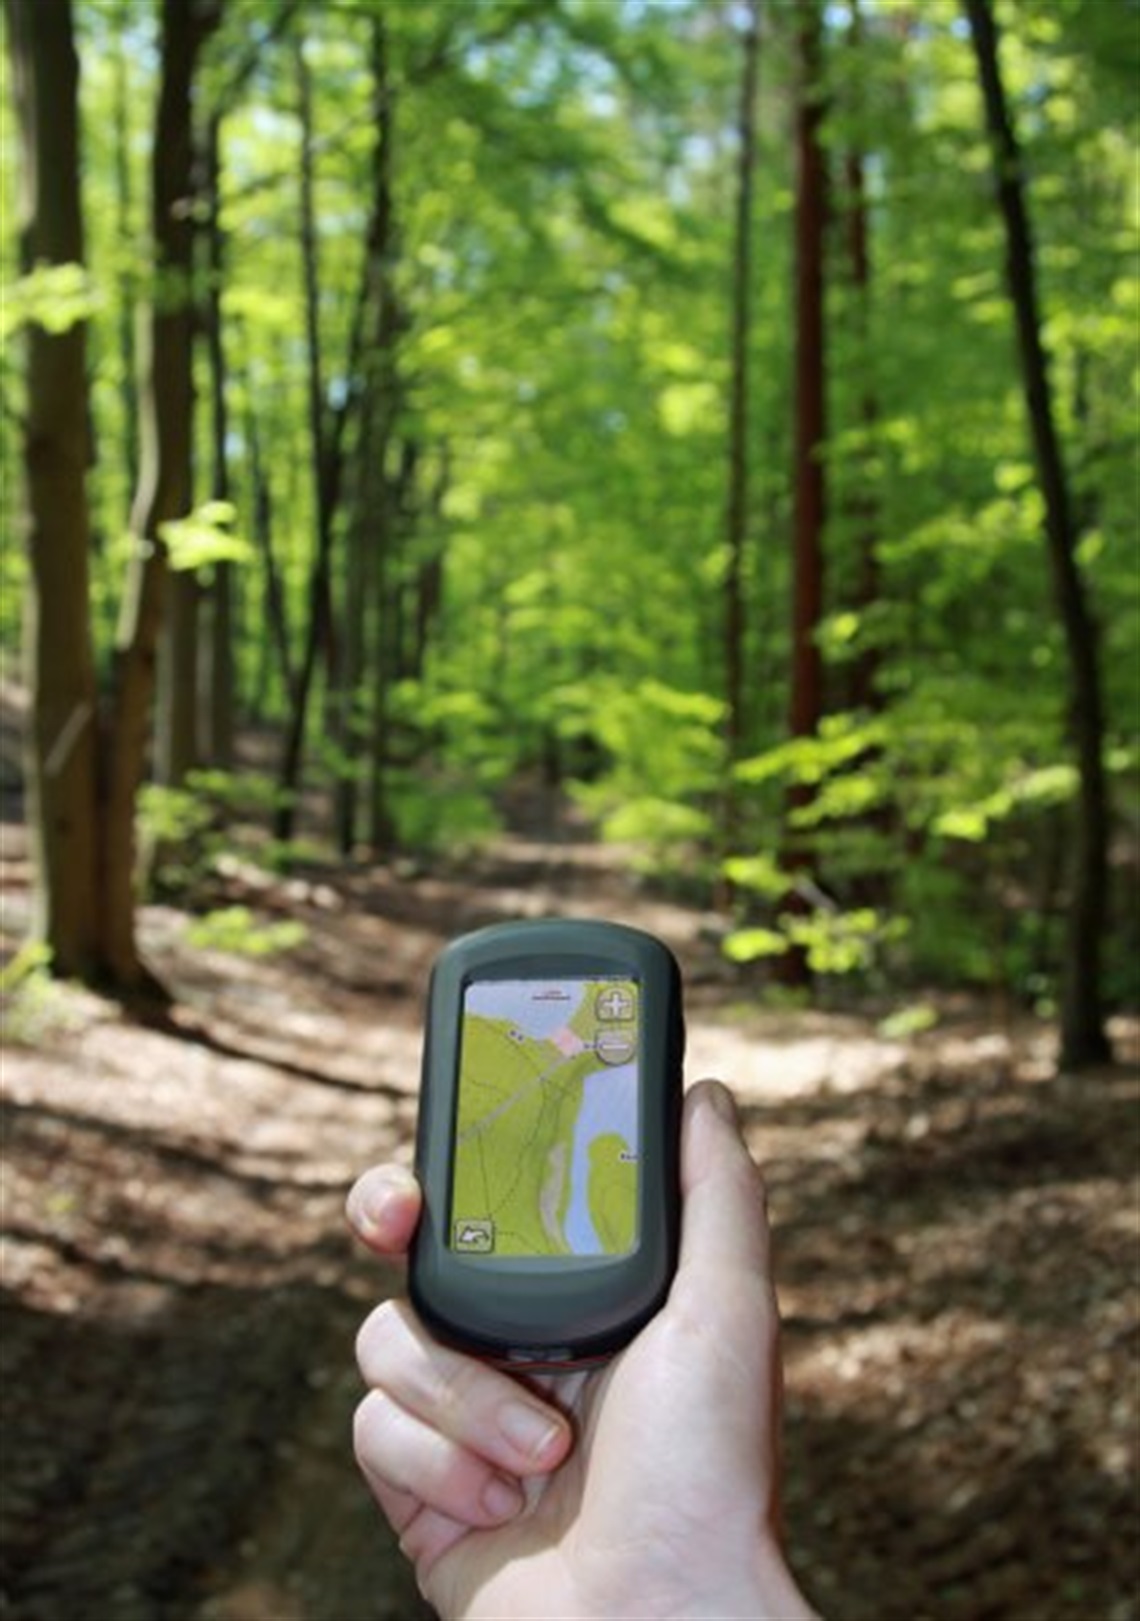 depositphotos_10822741-stock-photo-outdoor-navigation-in-the-forest.jpg